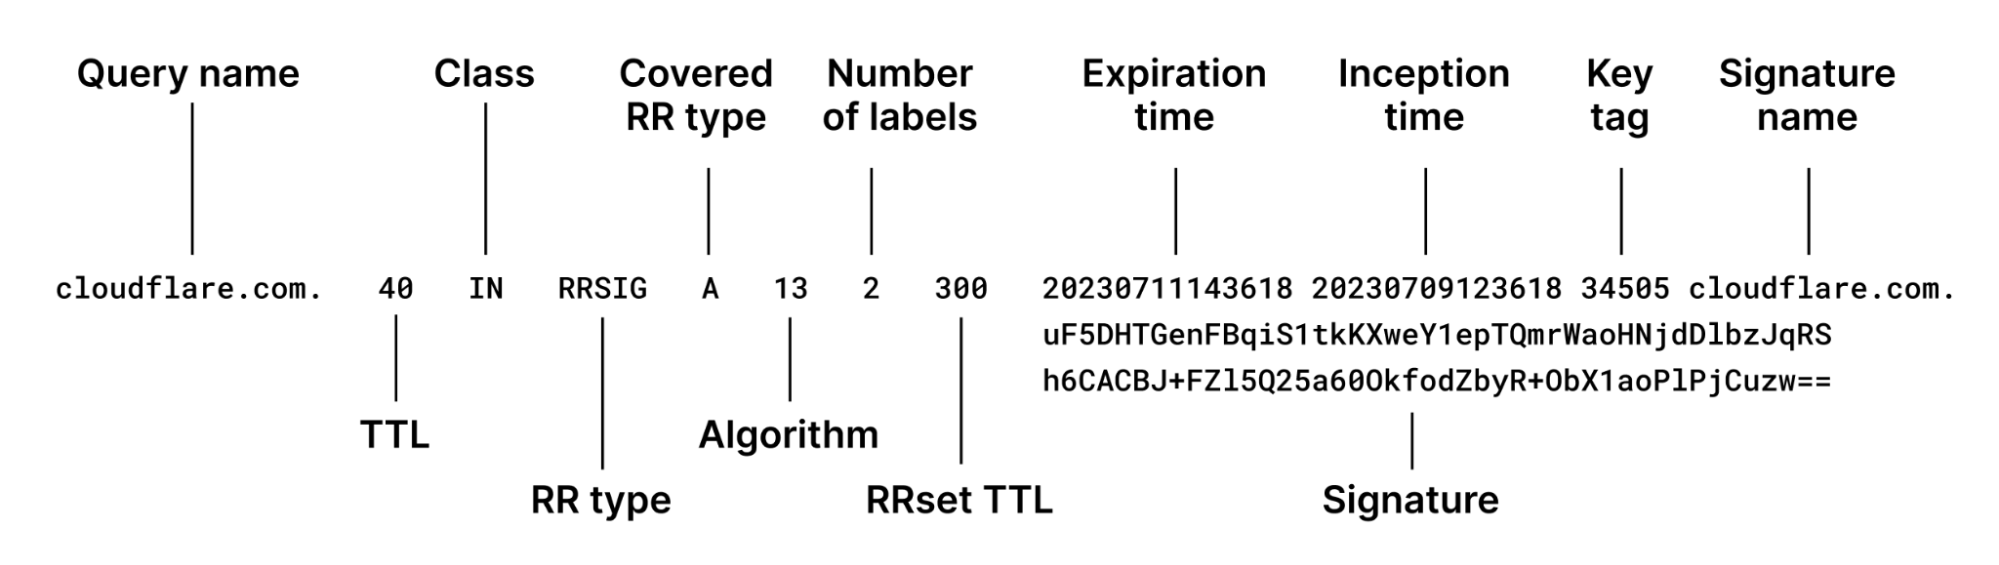 As you can see, the main part of the payload is associated with the signature and its corresponding metadata. Each recursive resolver is responsible for not only checking the signature but also the expiration time of the signature. It is important to obey the expiration time in order to avoid returning responses for RRsets that have been signed by old keys, which could have potentially been compromised by that time.